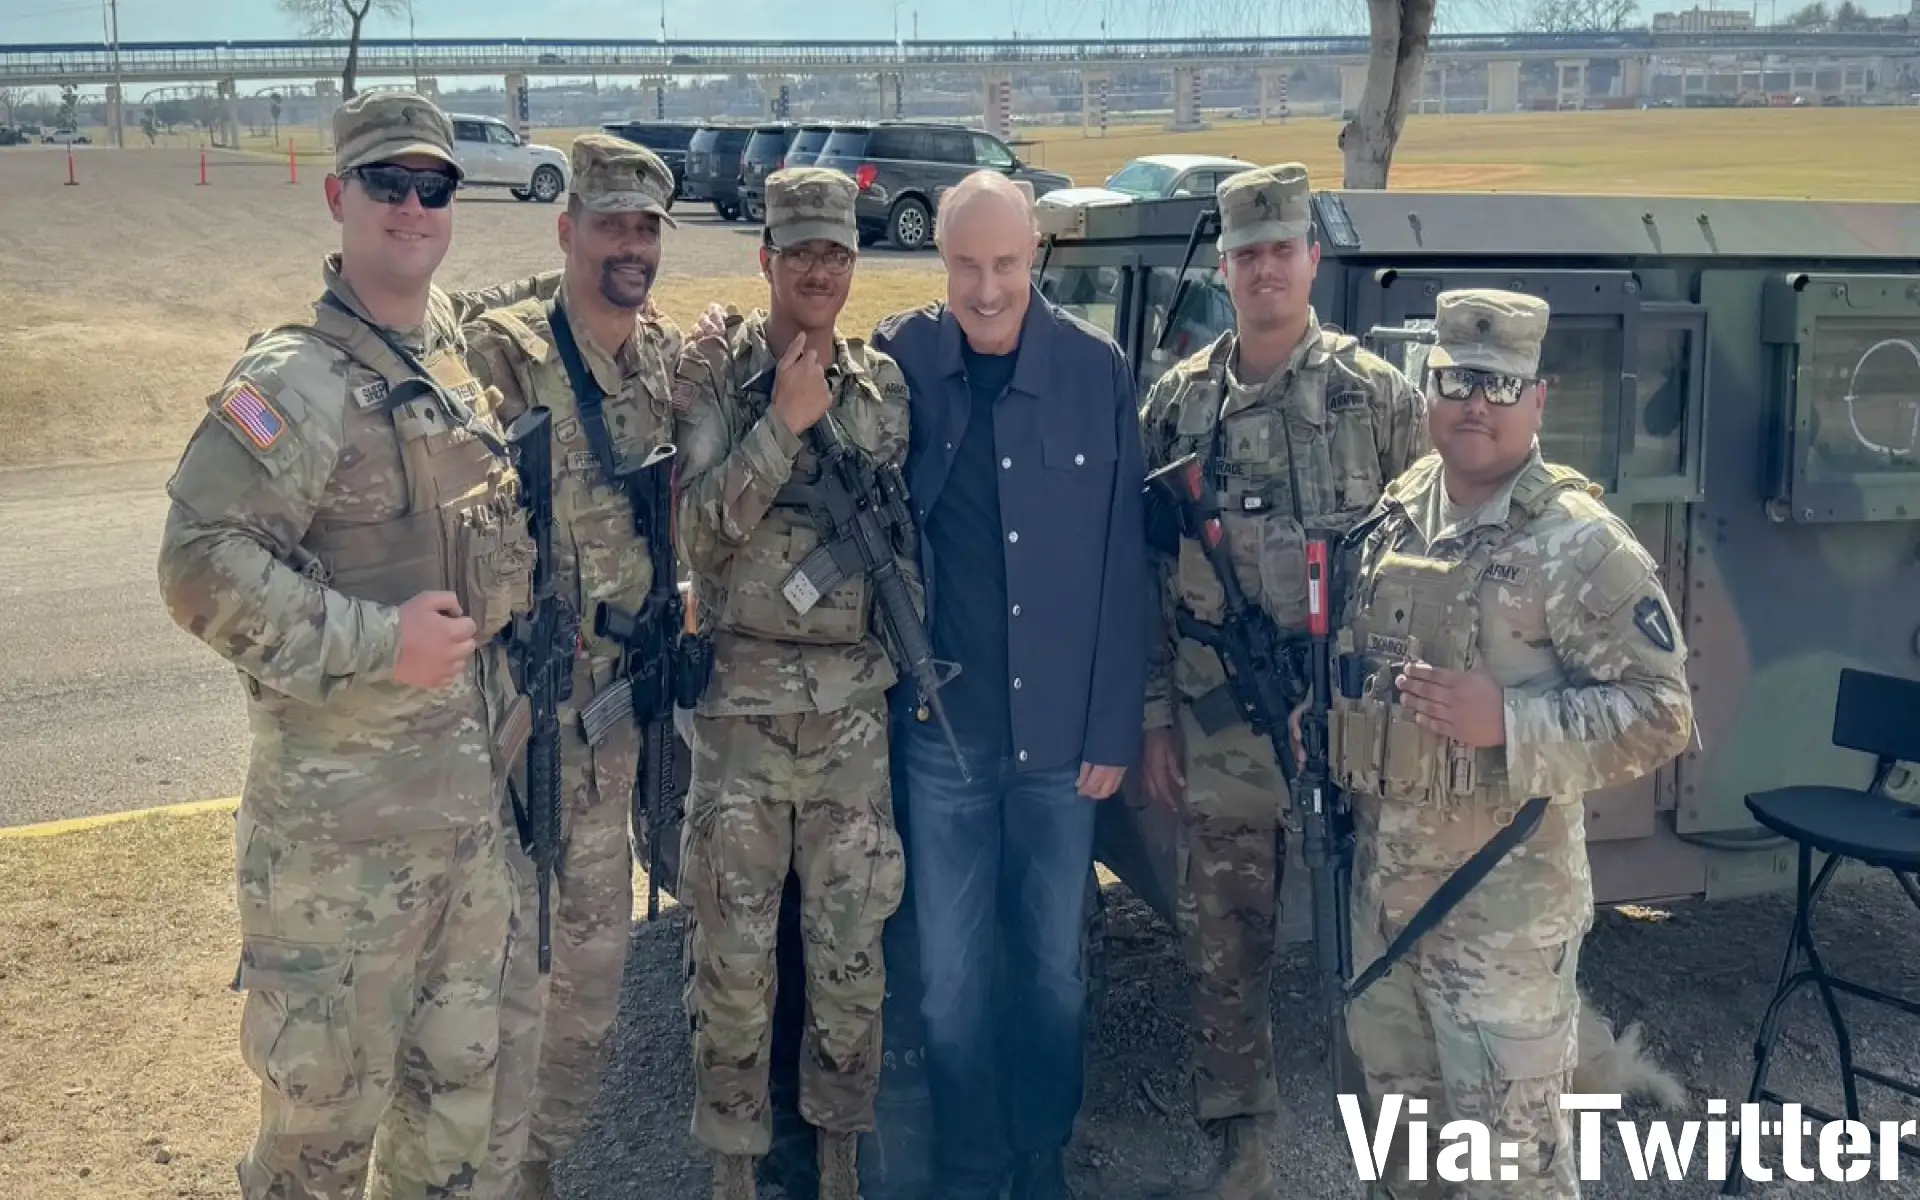 Dr. Phil Takes on the Immigration Crisis at the Southern Border